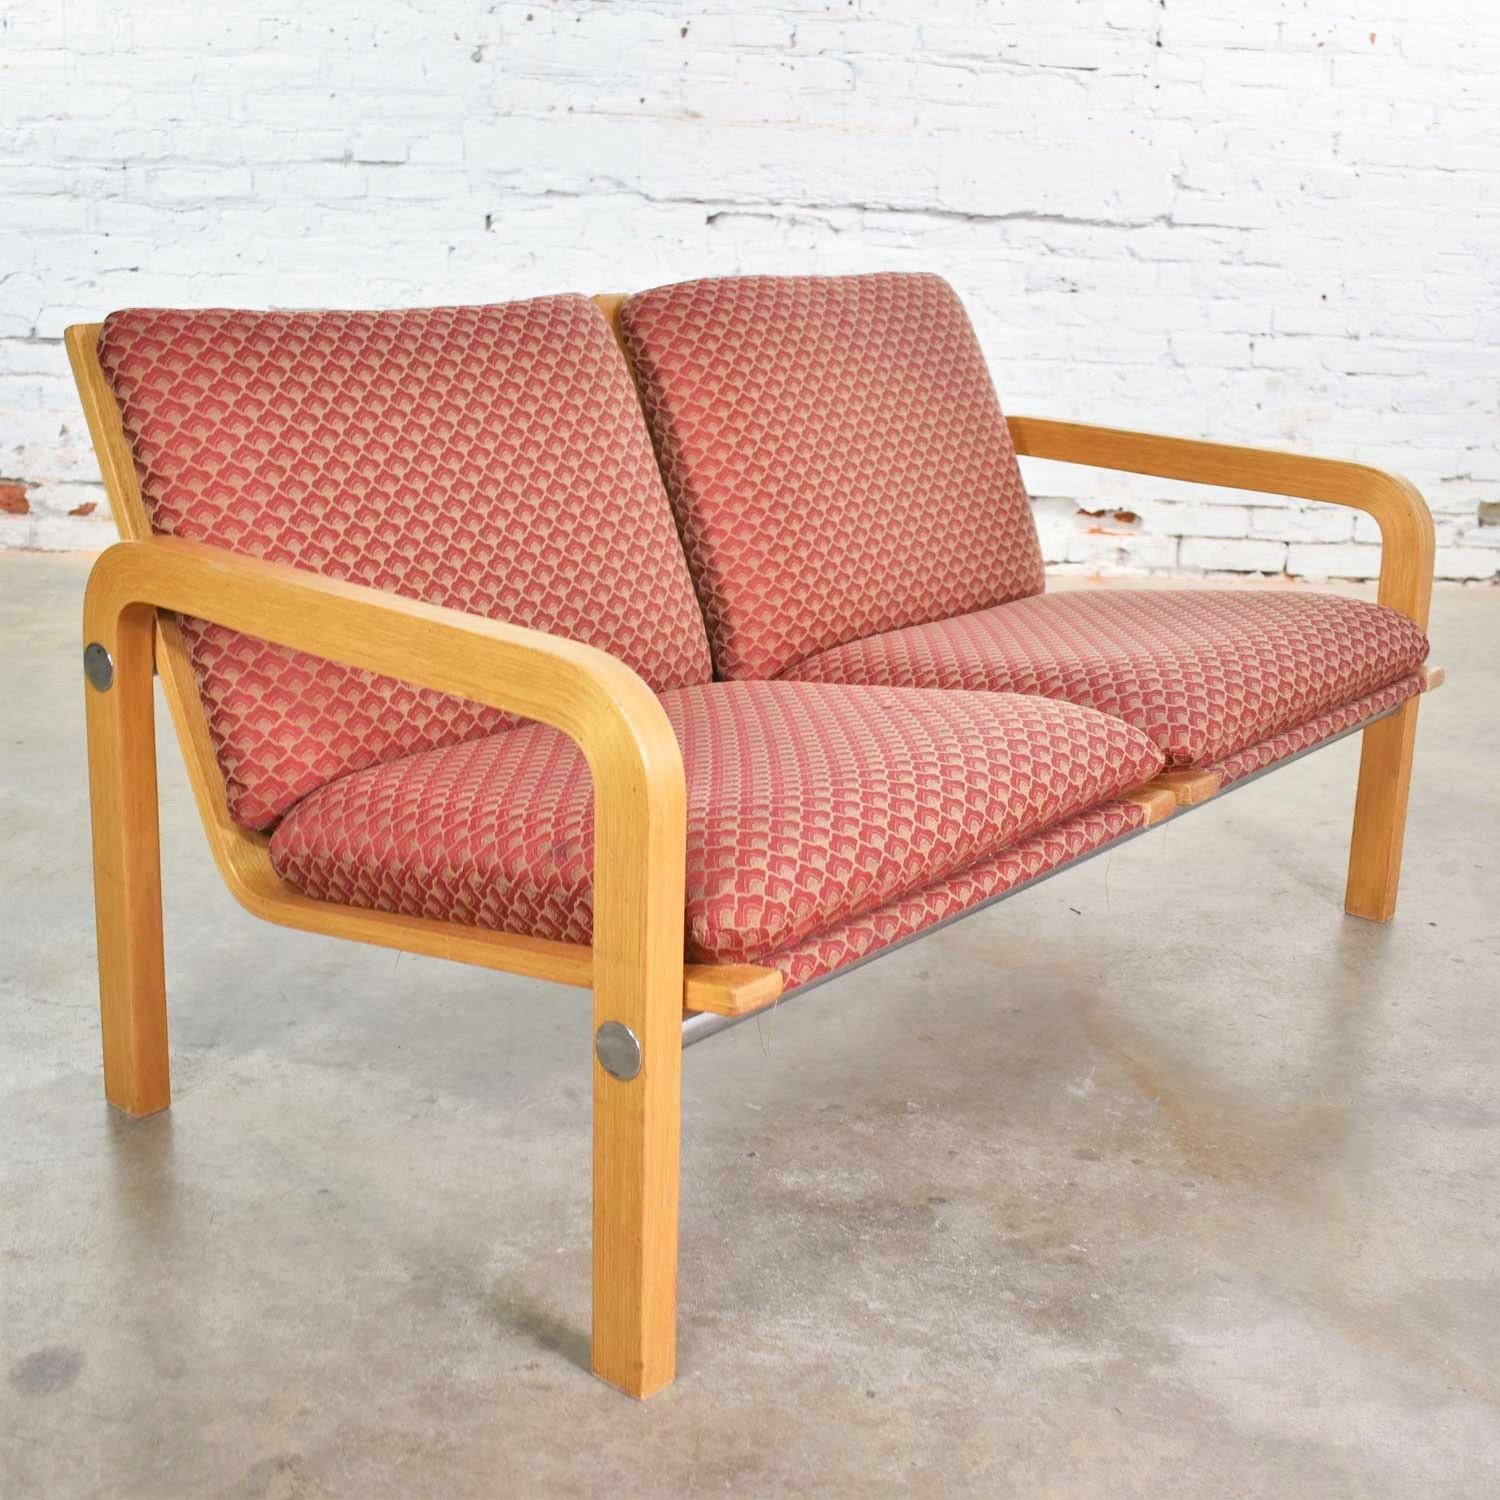 Handsome vintage modern two-seat settee or bench of oak bentwood, chrome, and upholstery attributed to Thonet. It is in wonderful vintage condition. The wood, chrome, and fabric are in ready to use condition although the fabric may not be the most